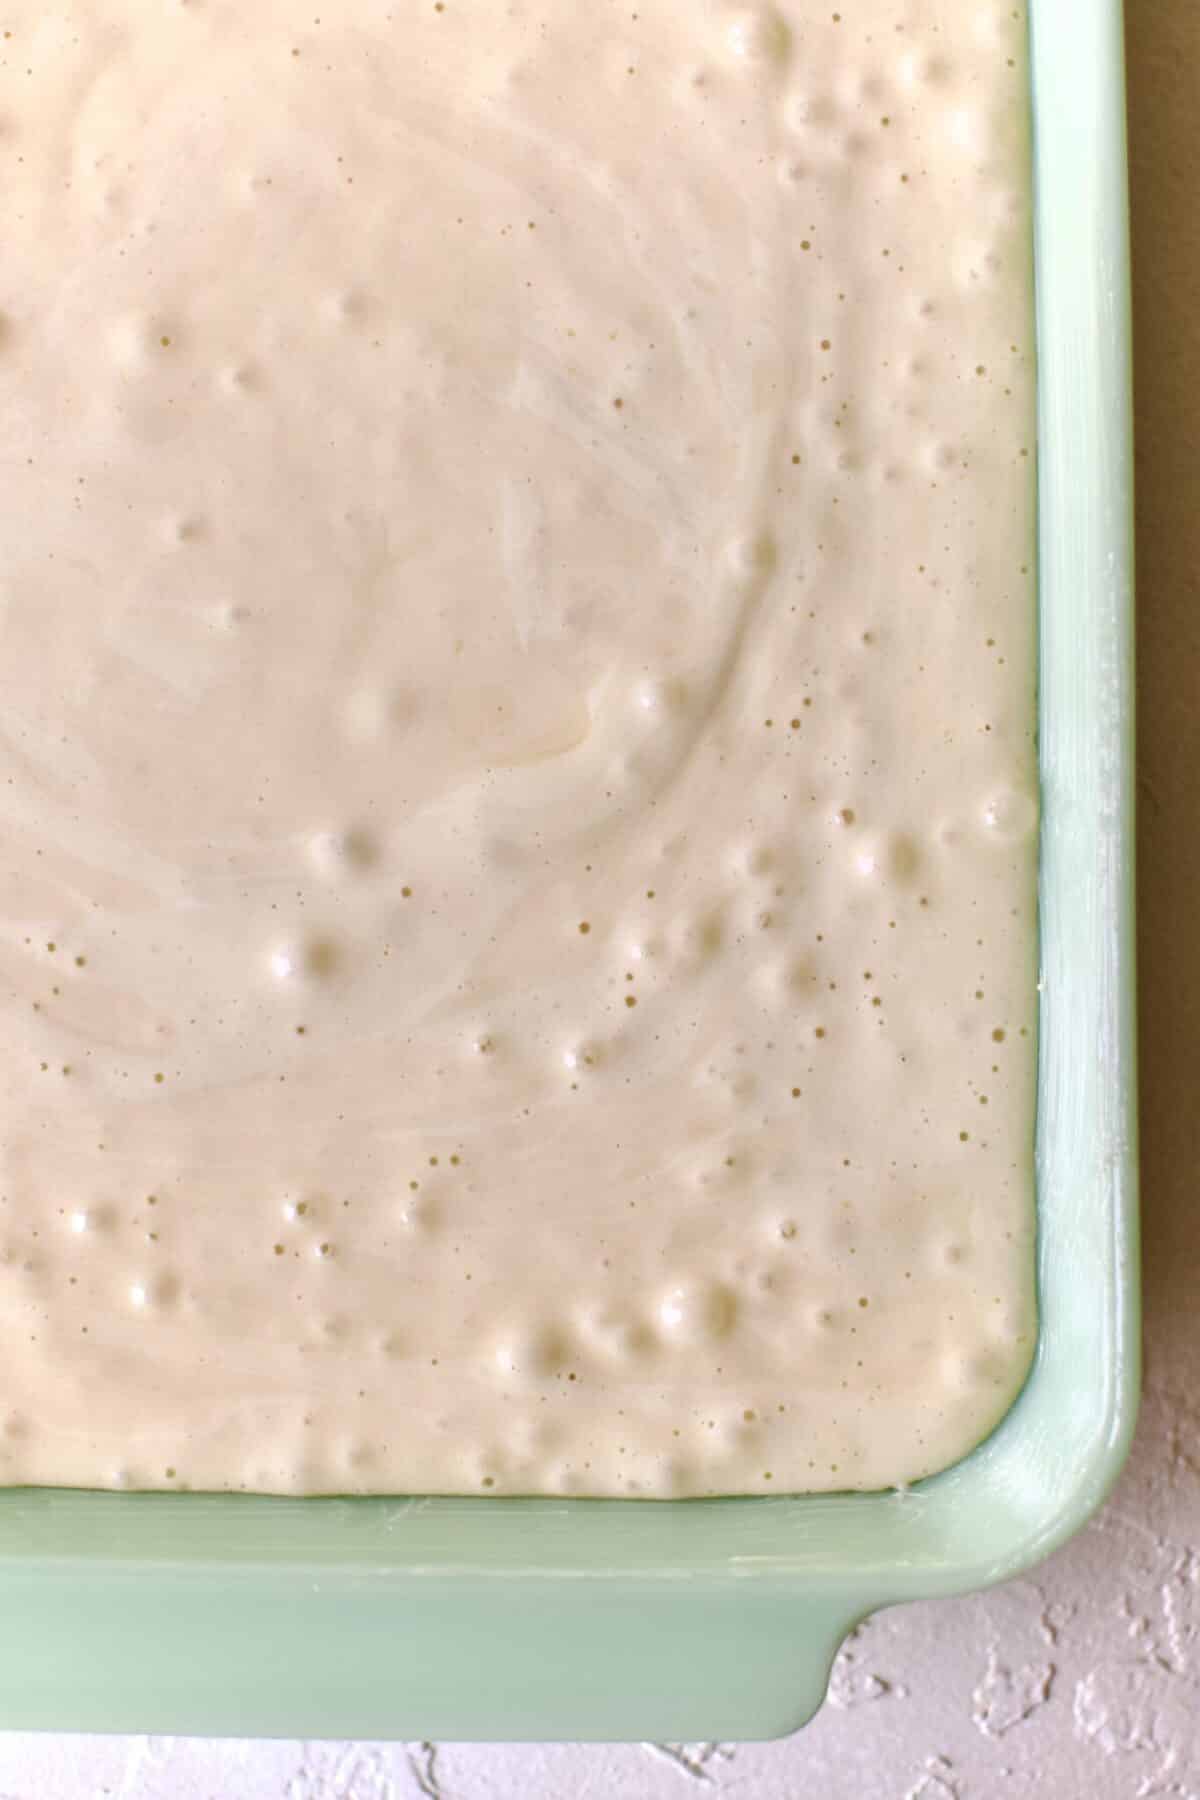 Tres leches cake batter in a buttered baking dish.